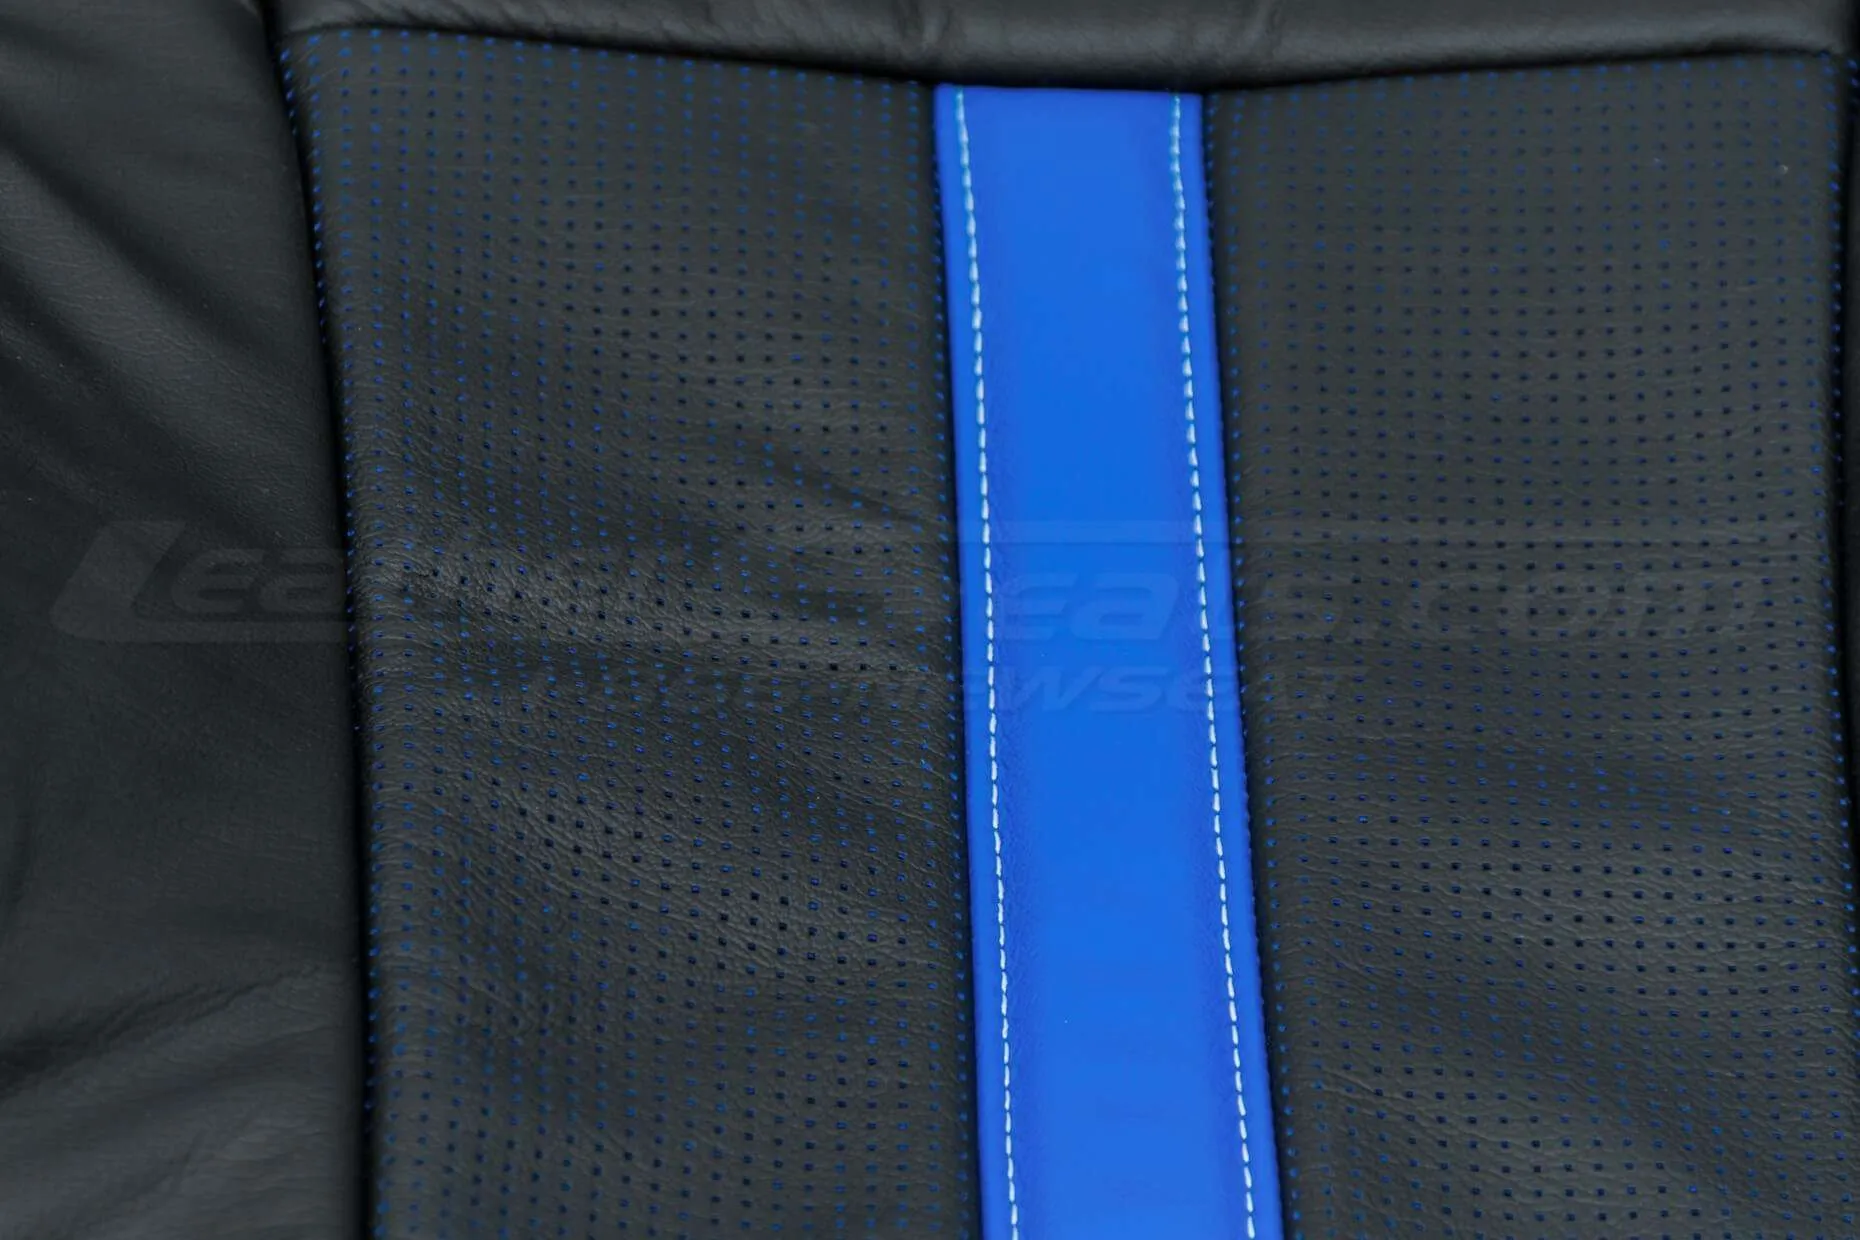 Ford F-150 Upholstery Kit - Installed - Black & Piazza Blue - Perforation closeup & leather texture difference.